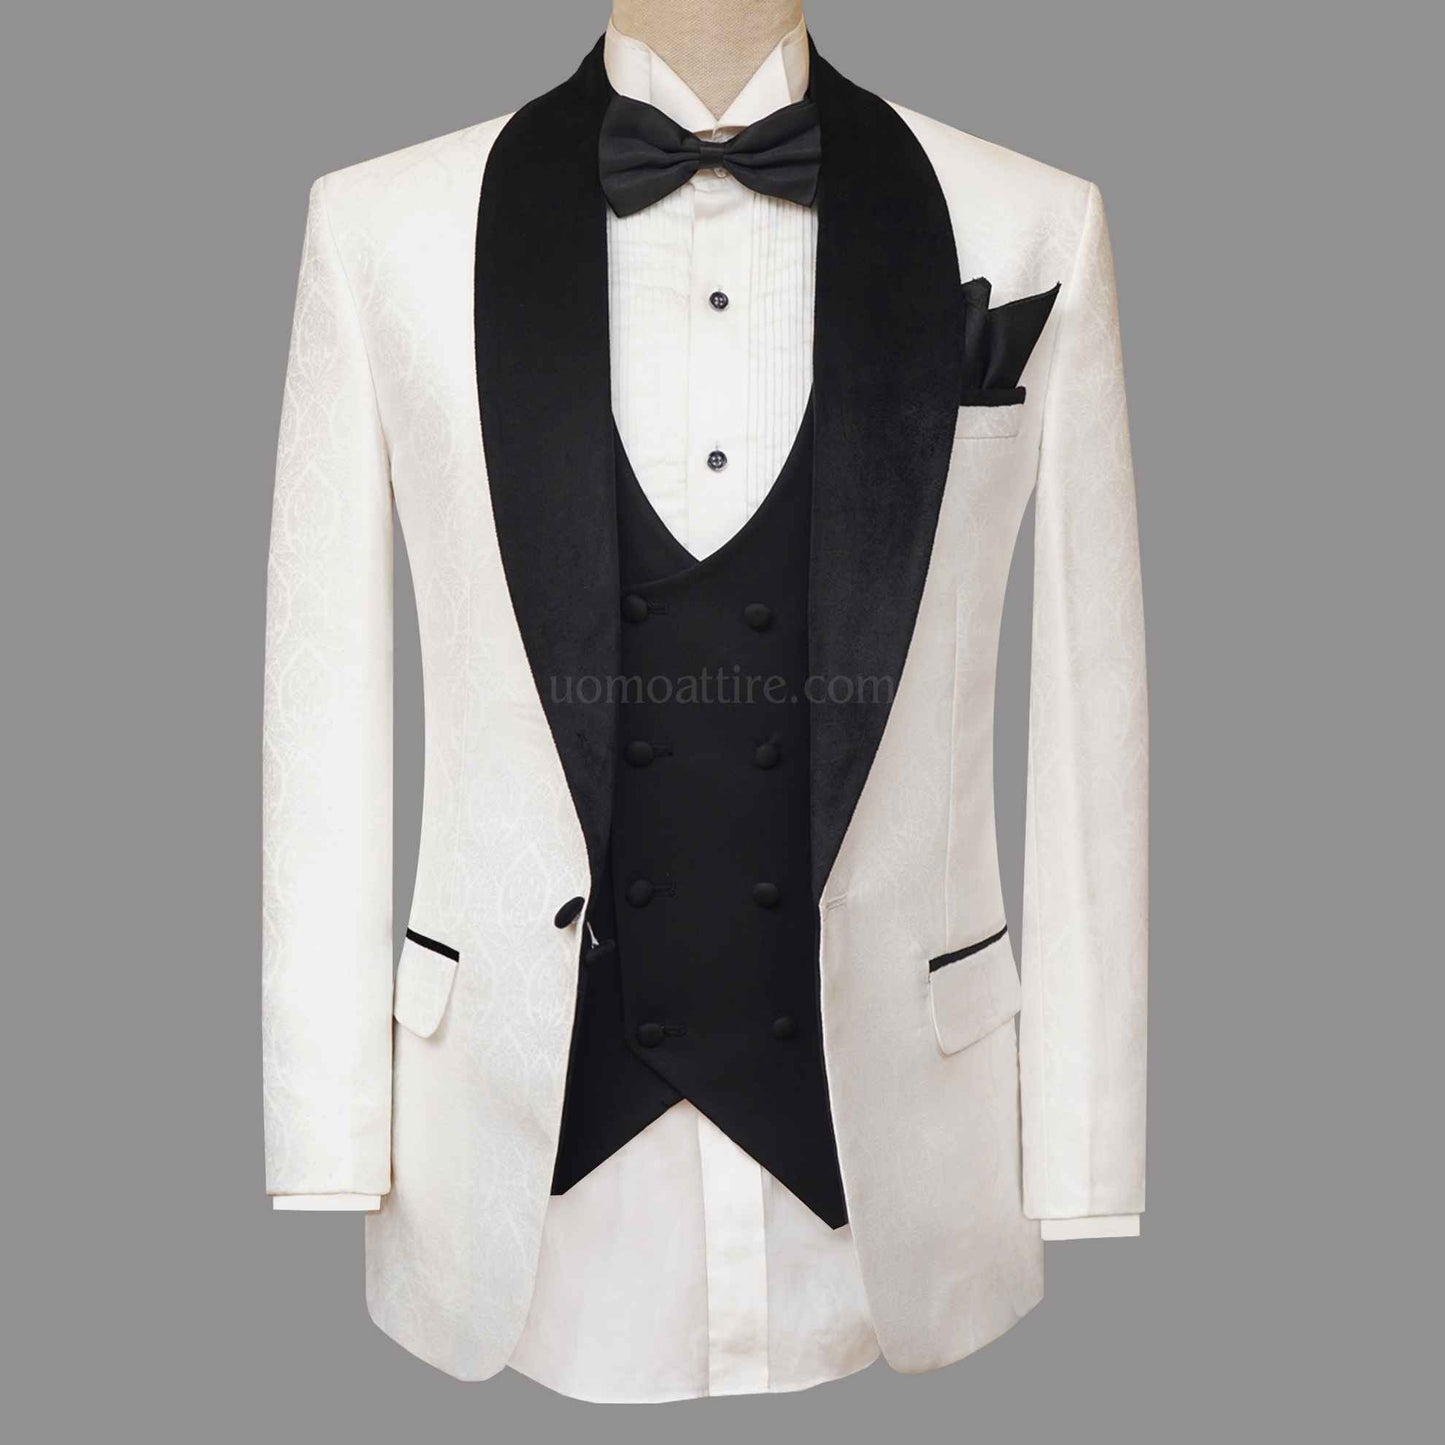 textured fabric white tuxedo 3 piece suit, white tuxedo 3 piece suit with black contrast vest and shawl